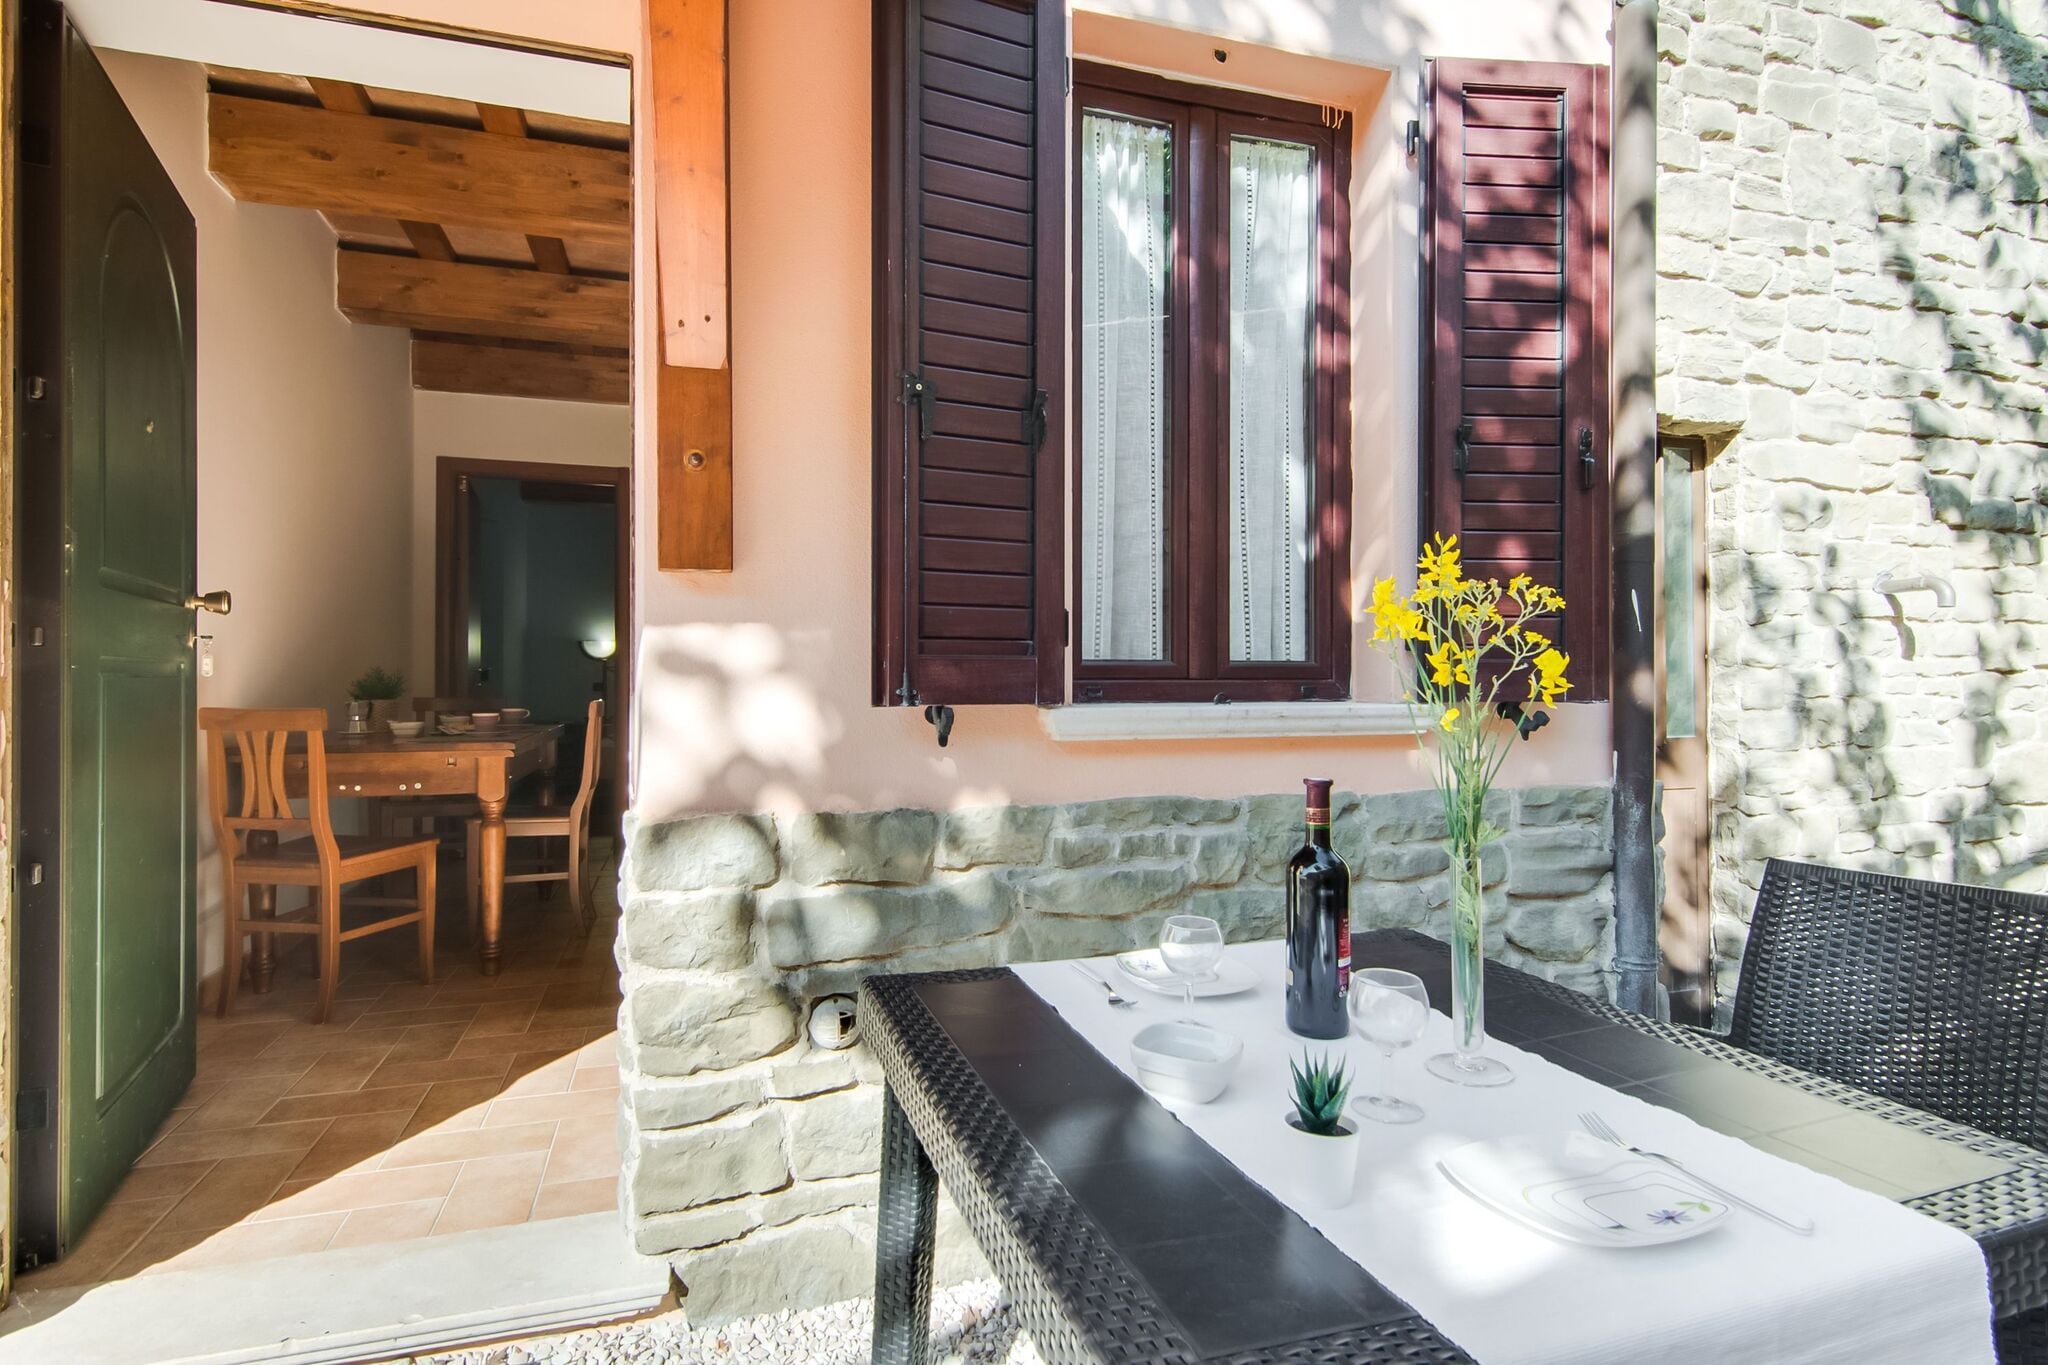 Agriturismo in the Appenines with covered swimming pool and bubble bath